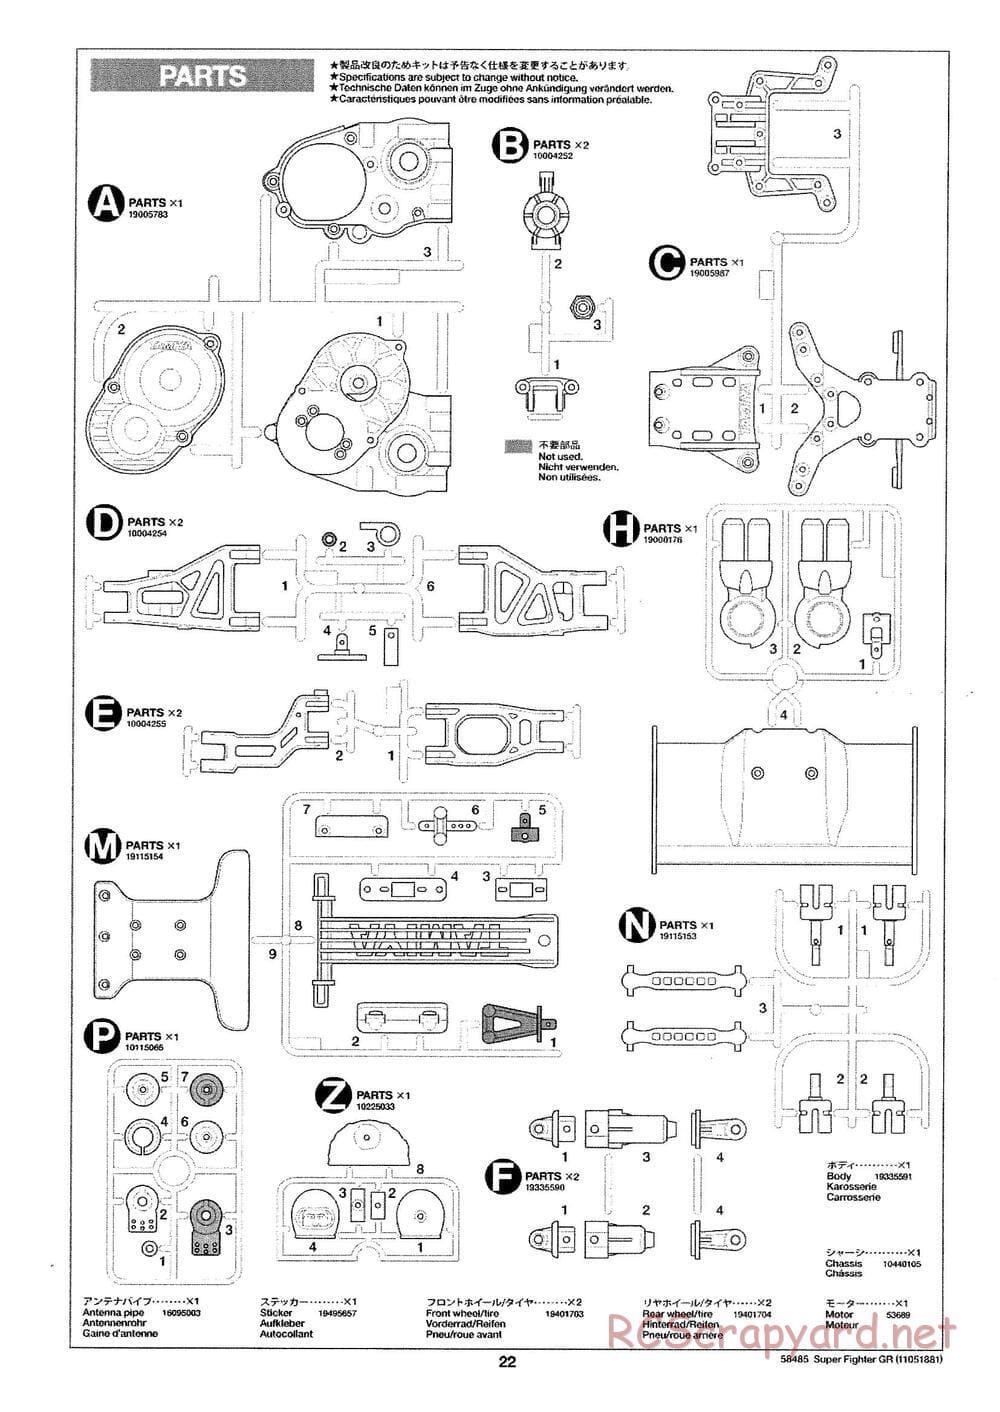 Tamiya - Super Fighter GR - DT-02 Chassis - Manual - Page 22